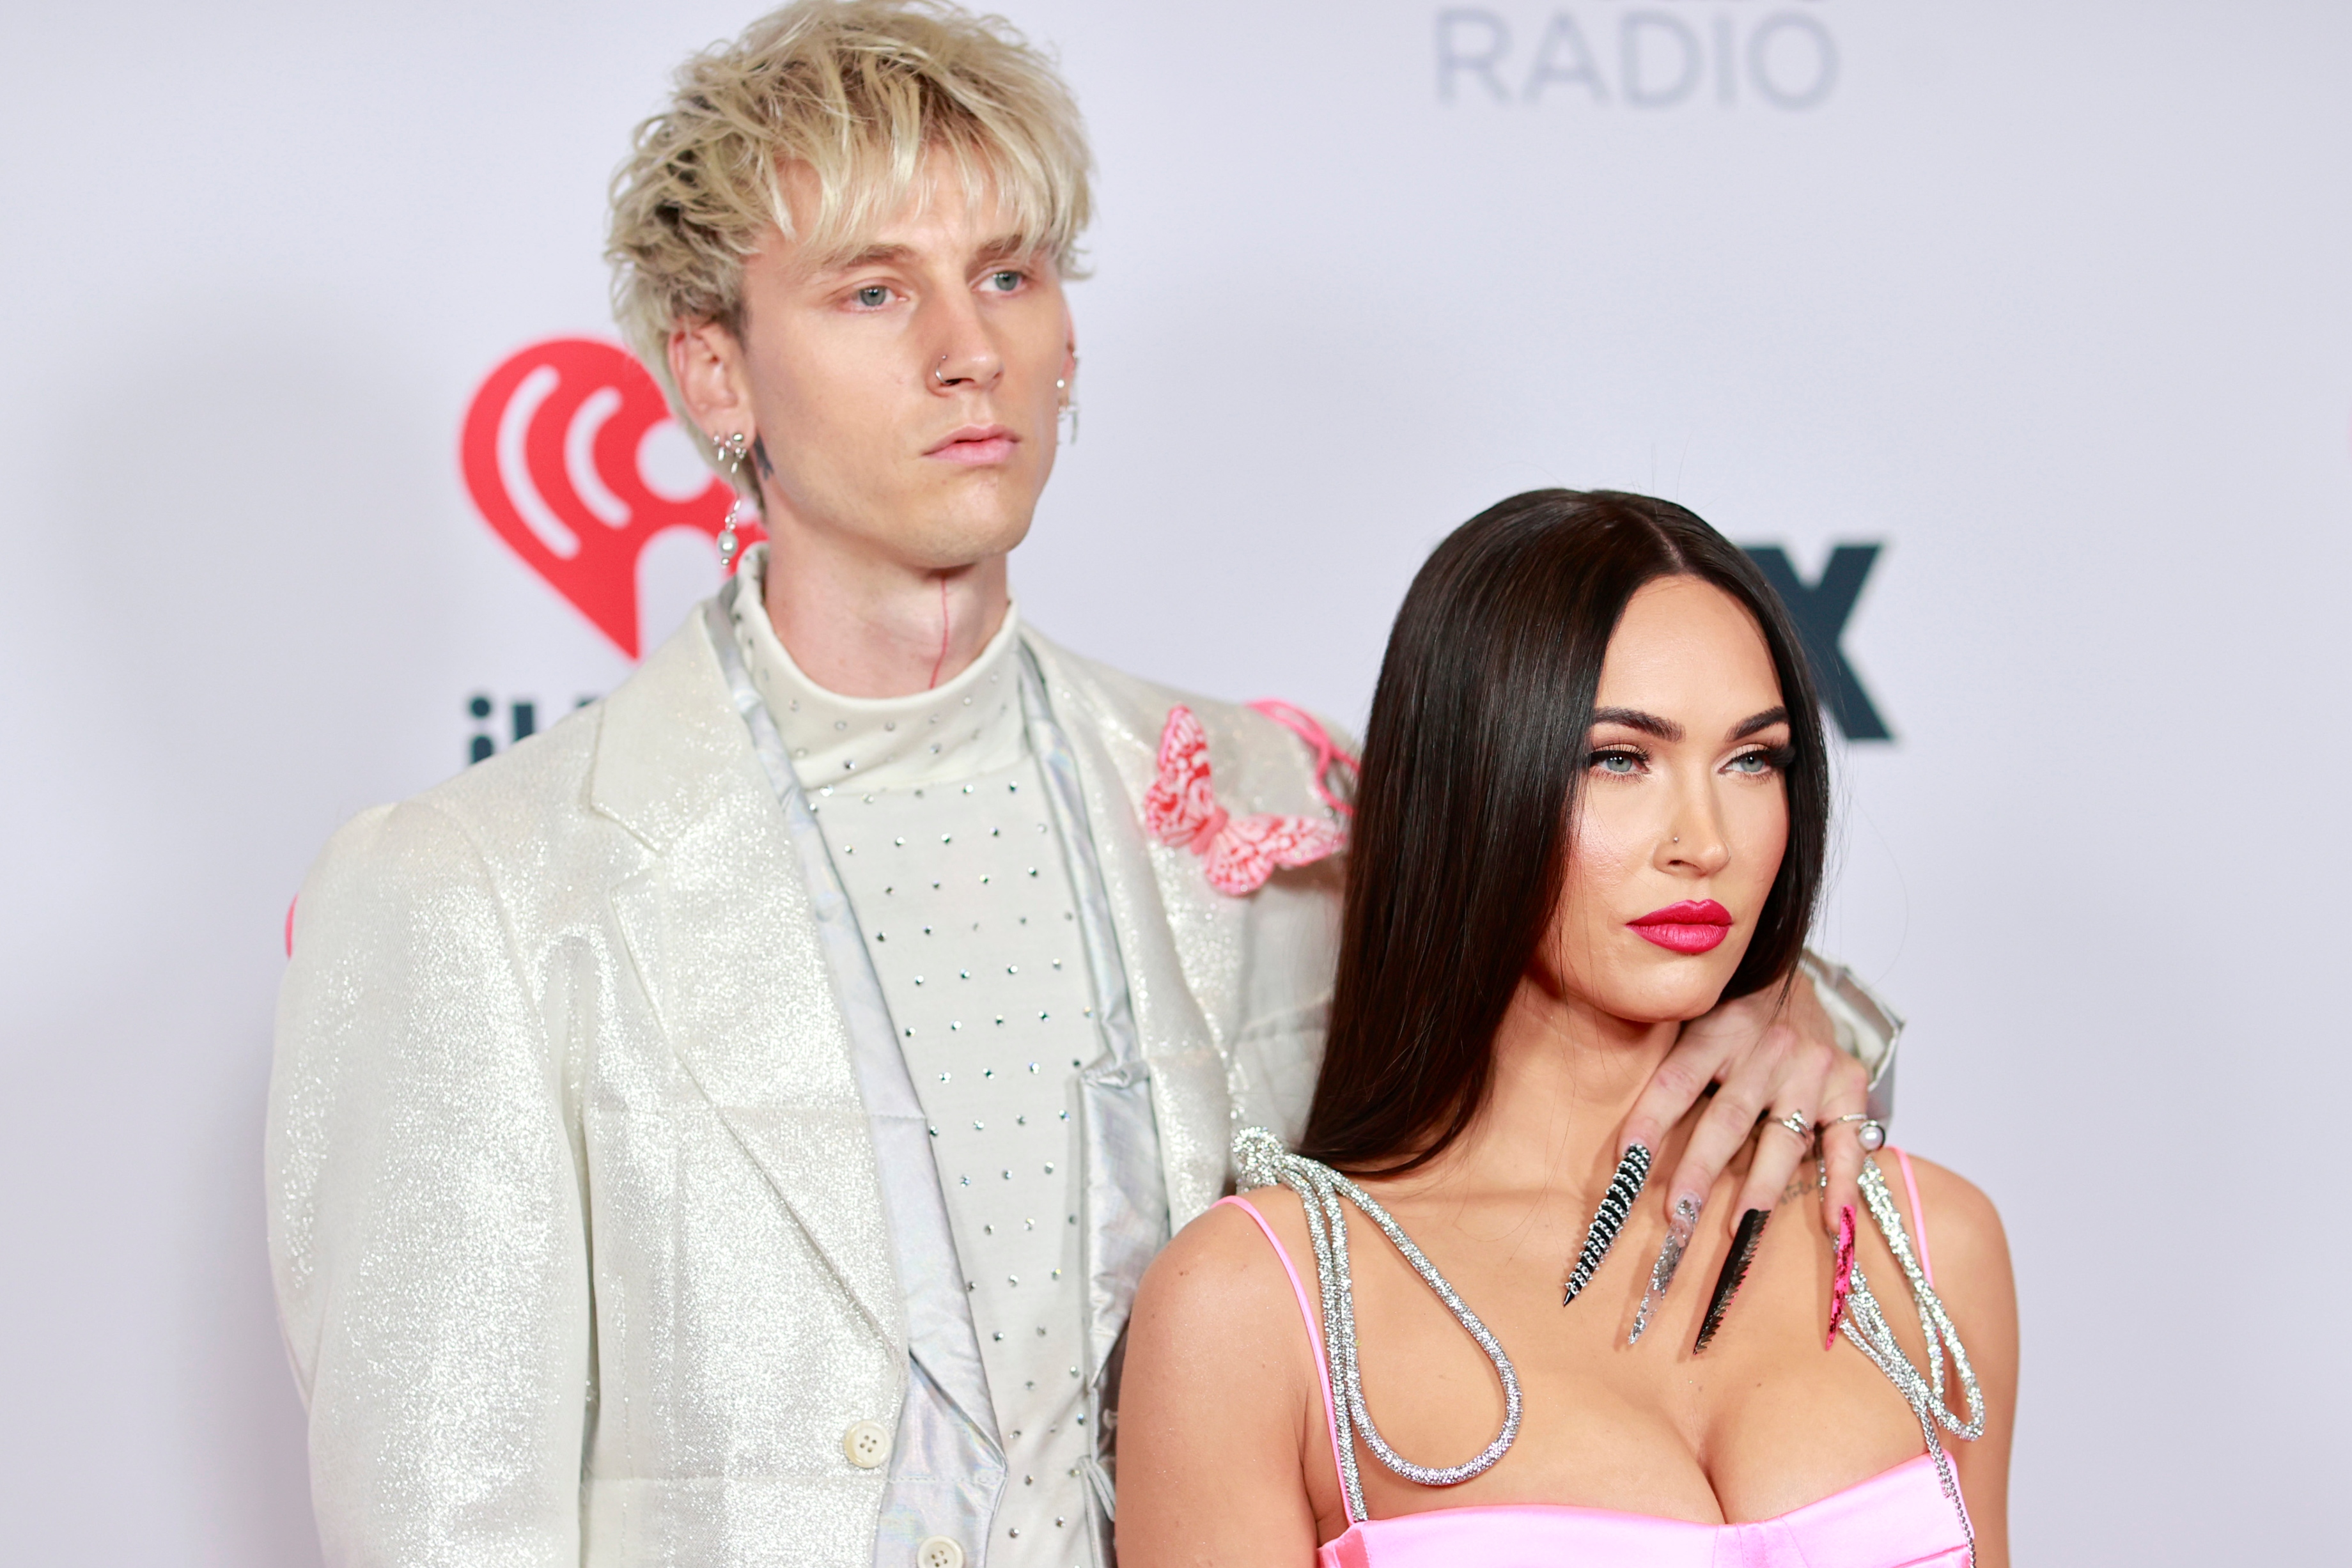 This is the interesting look of Megan Fox and Machine Gun Kelly that has the networks talking